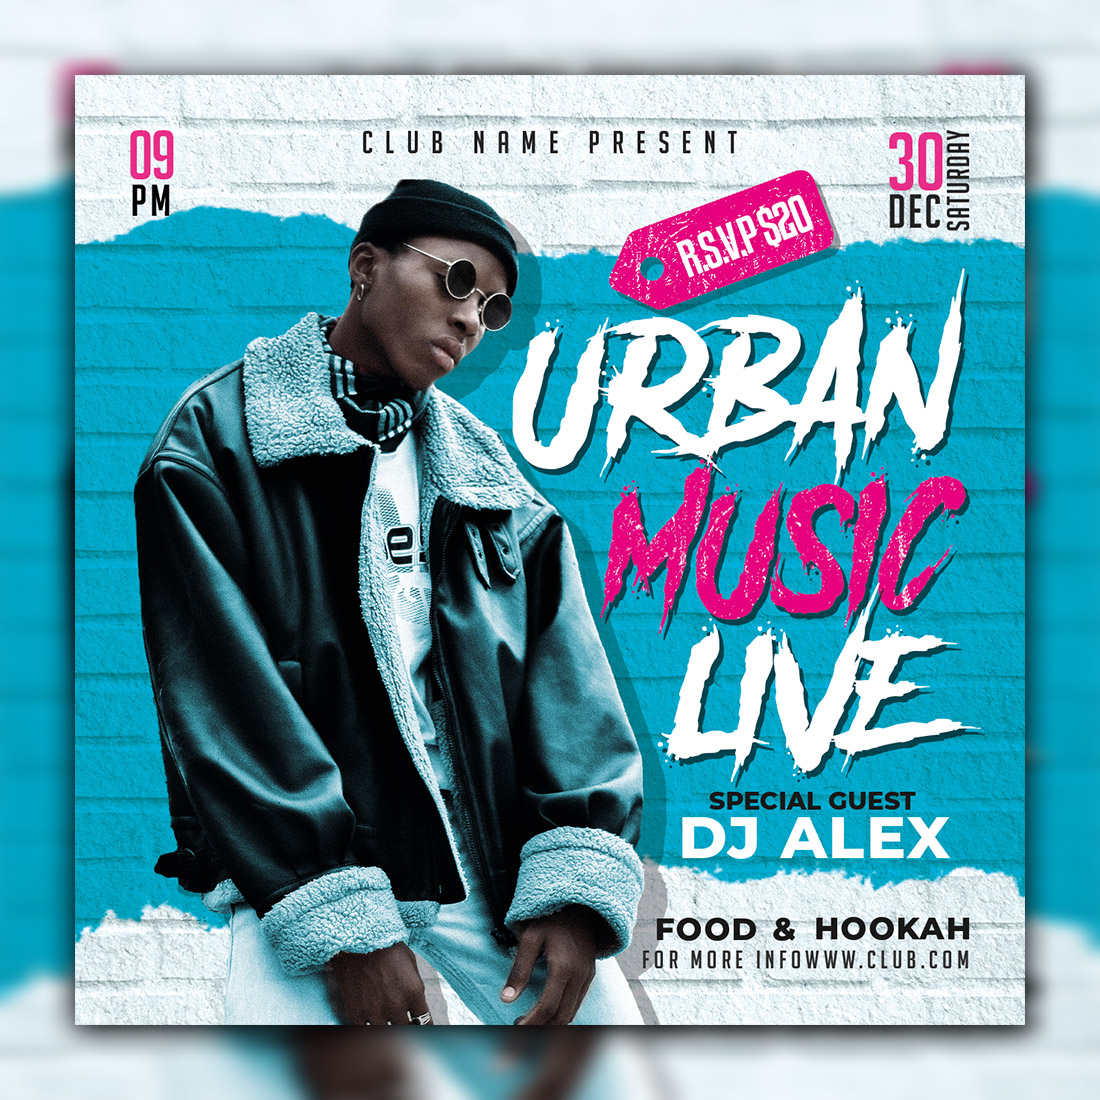 DJ Party Flyer PSD Template for Social Media cover image.